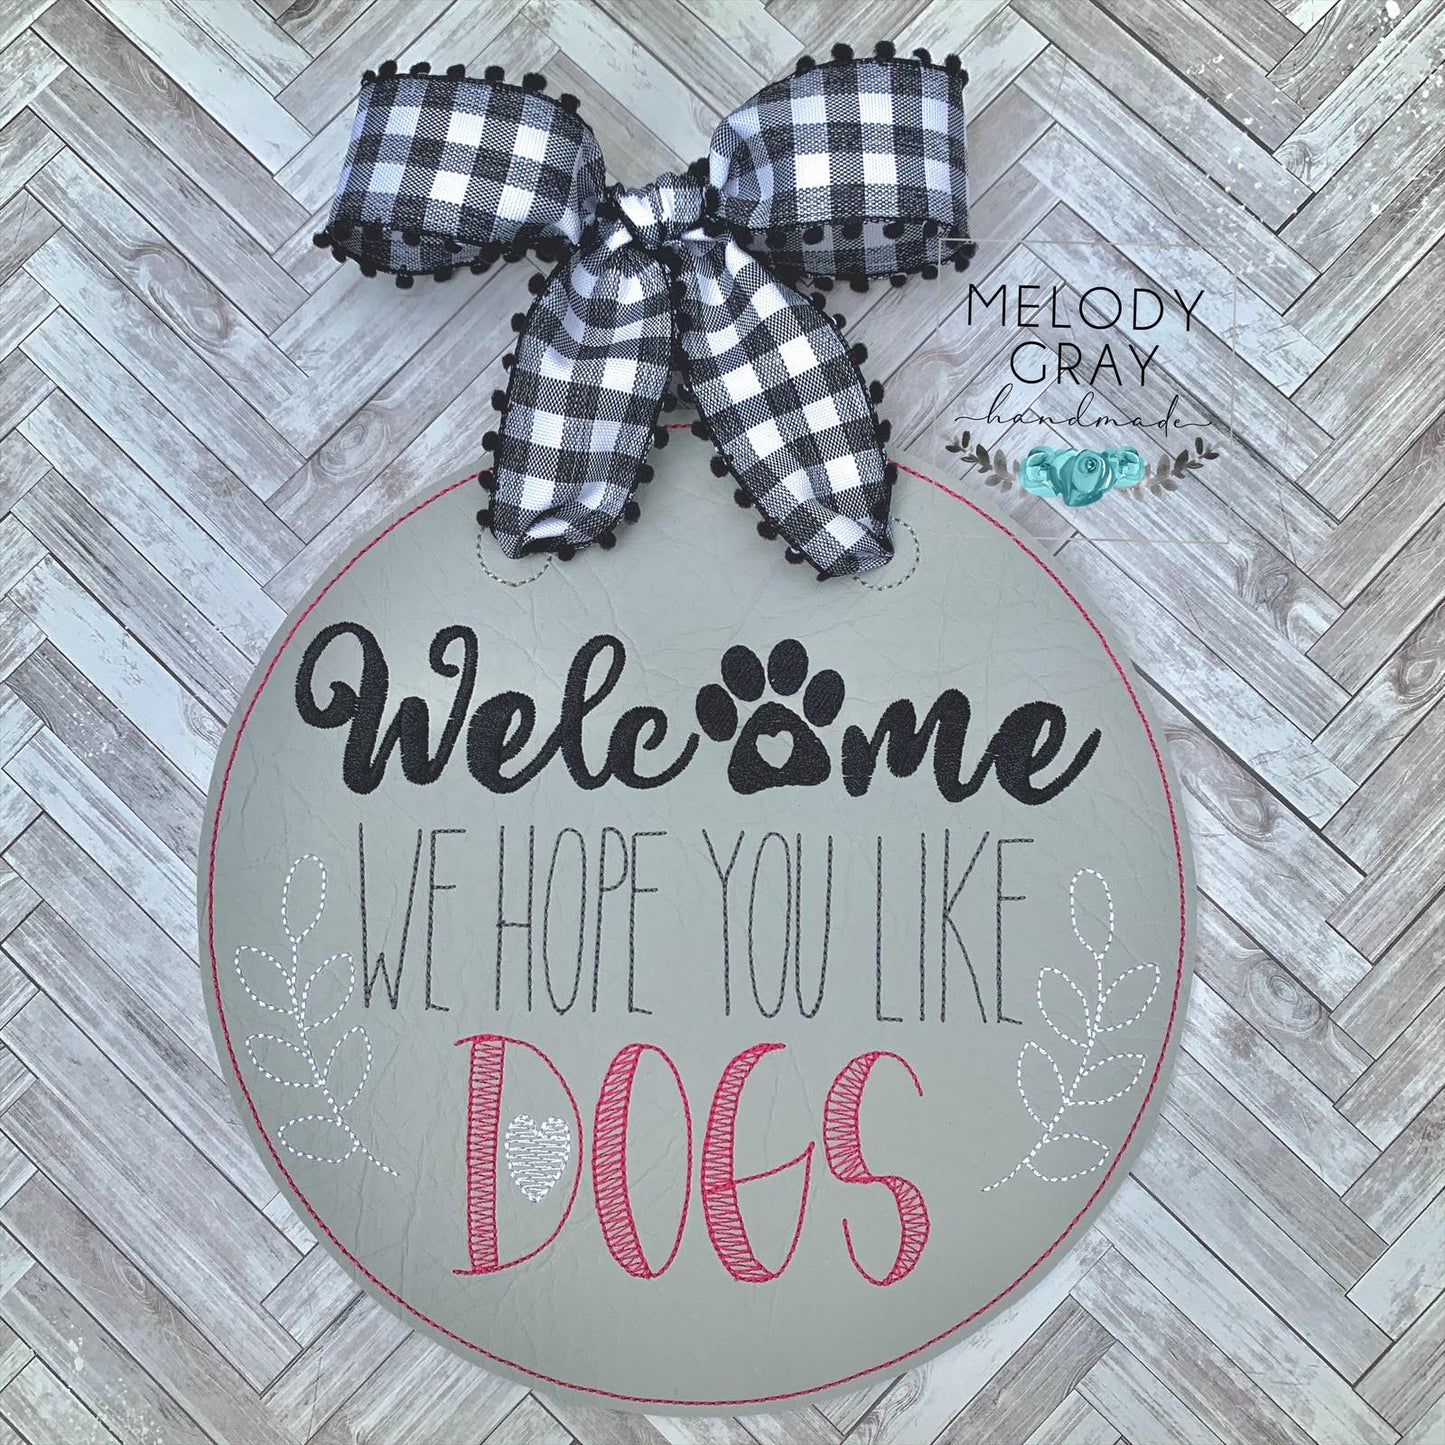 Welcome We Hope You Like Dogs Door Hanger - 3 sizes - Digital Embroidery Design